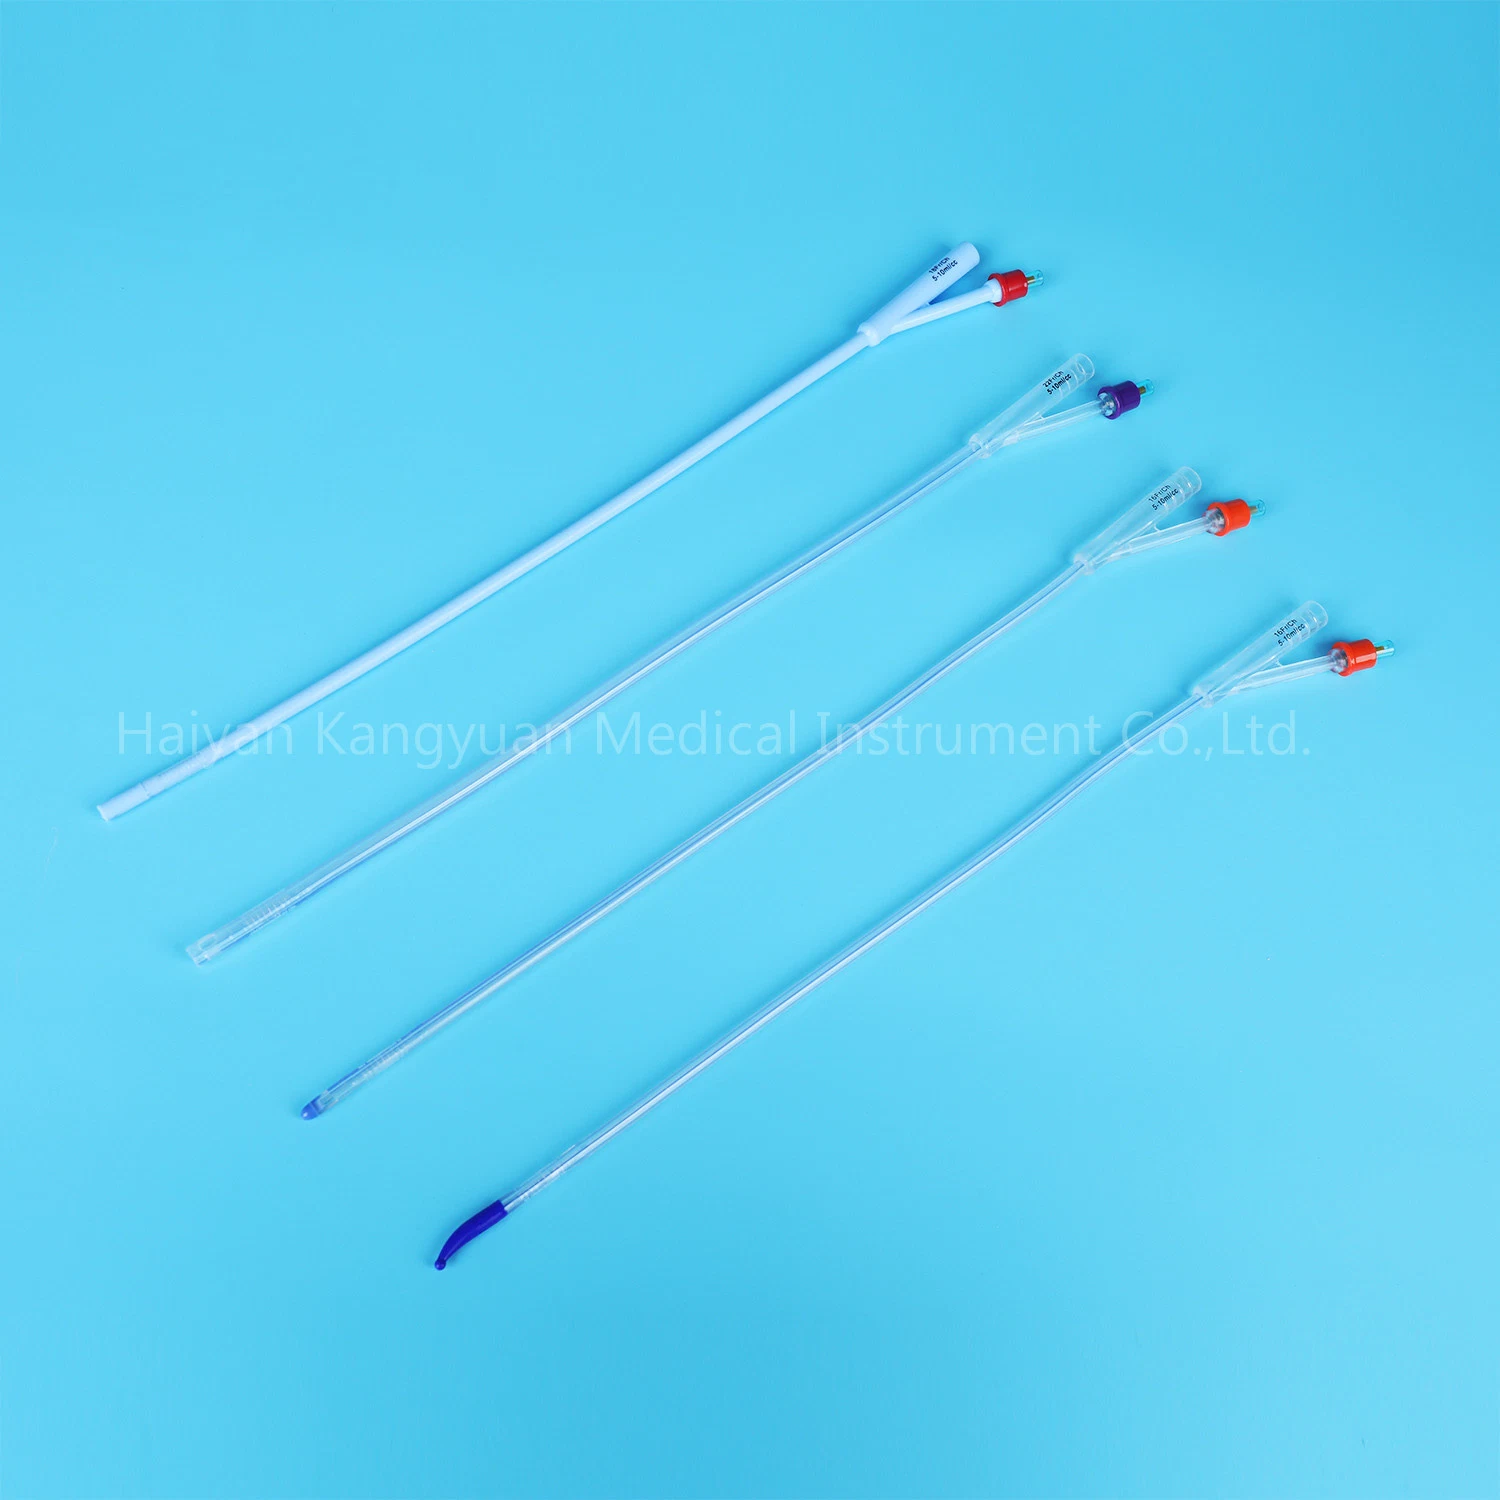 Silicone Foley Catheter Integrated Flat Balloon Unibal Integral Balloon Technology Tiemann Tipped Urethral Use